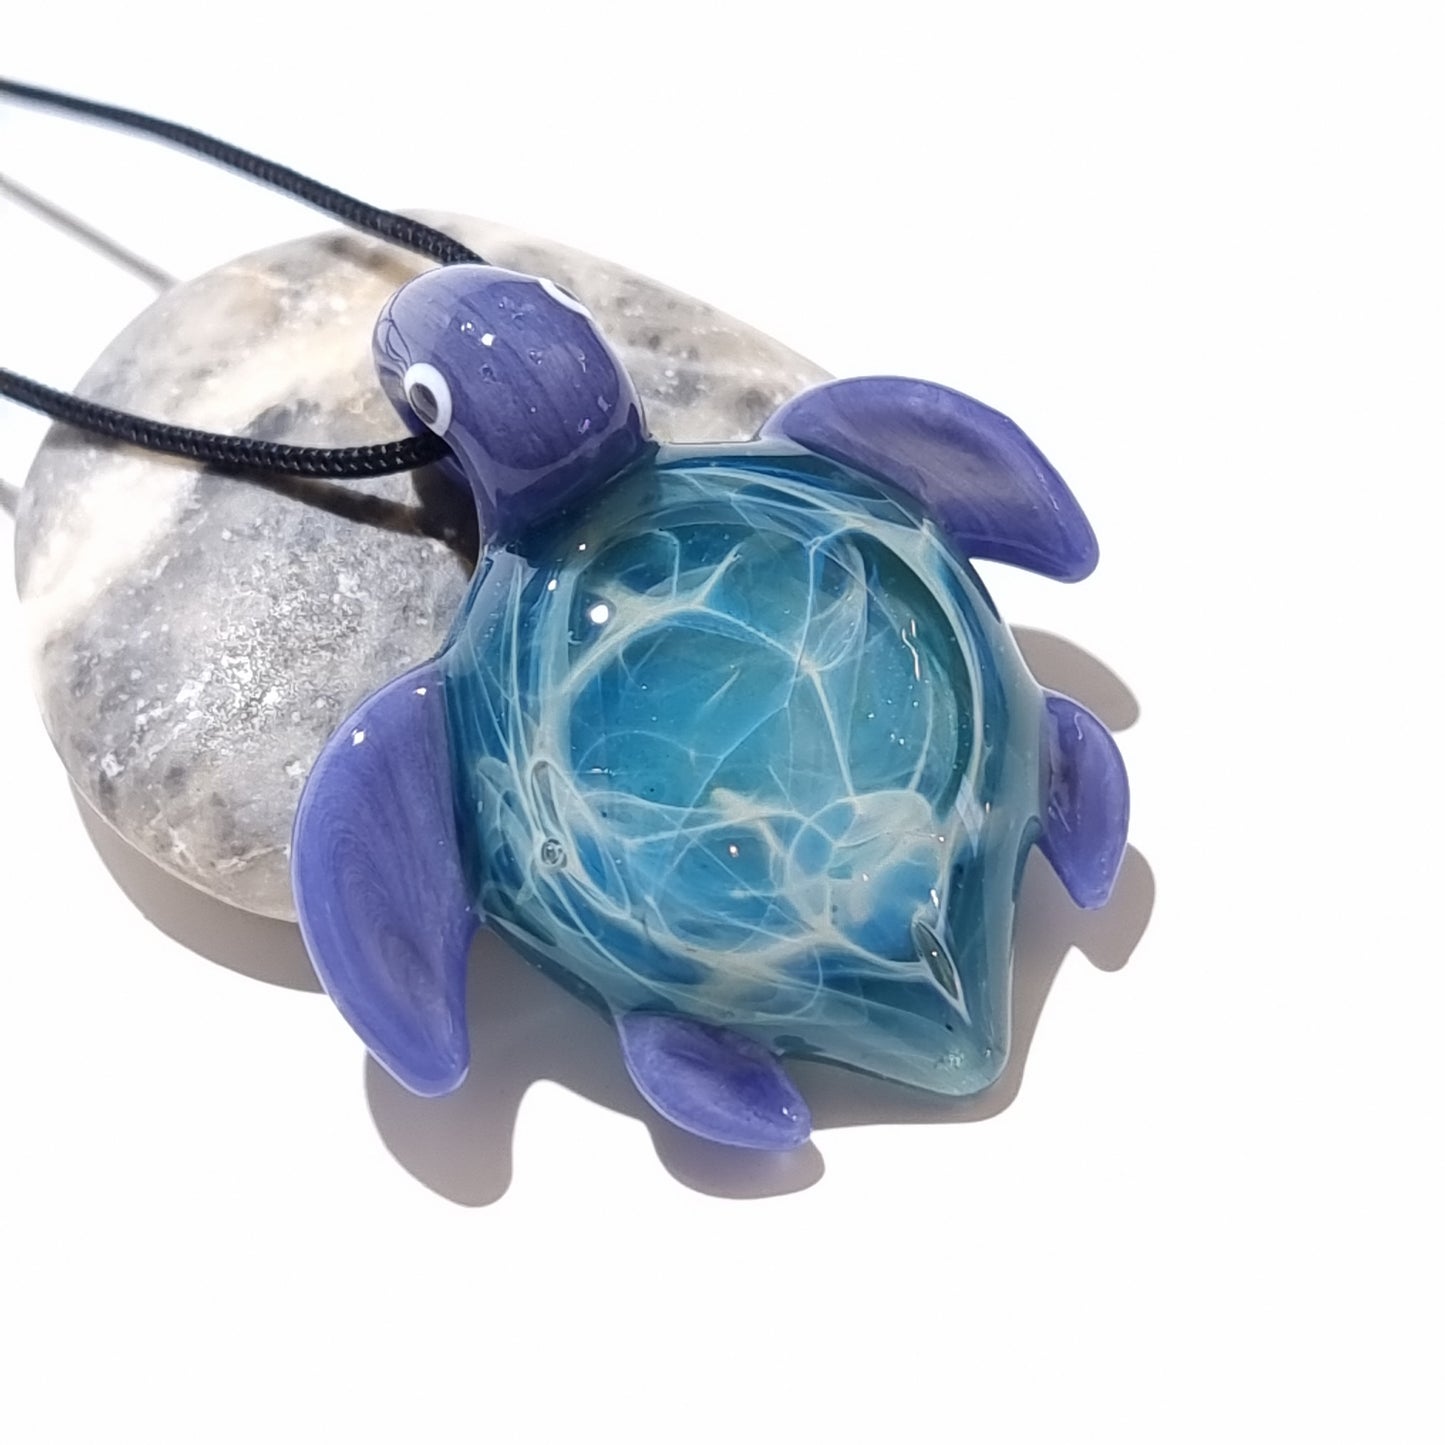 Glass Turtle - Baby Starburst Turtle Pendant - Glass Pendant - Glass Jewelry - Blown Glass - Artist Signed - Details of Silver